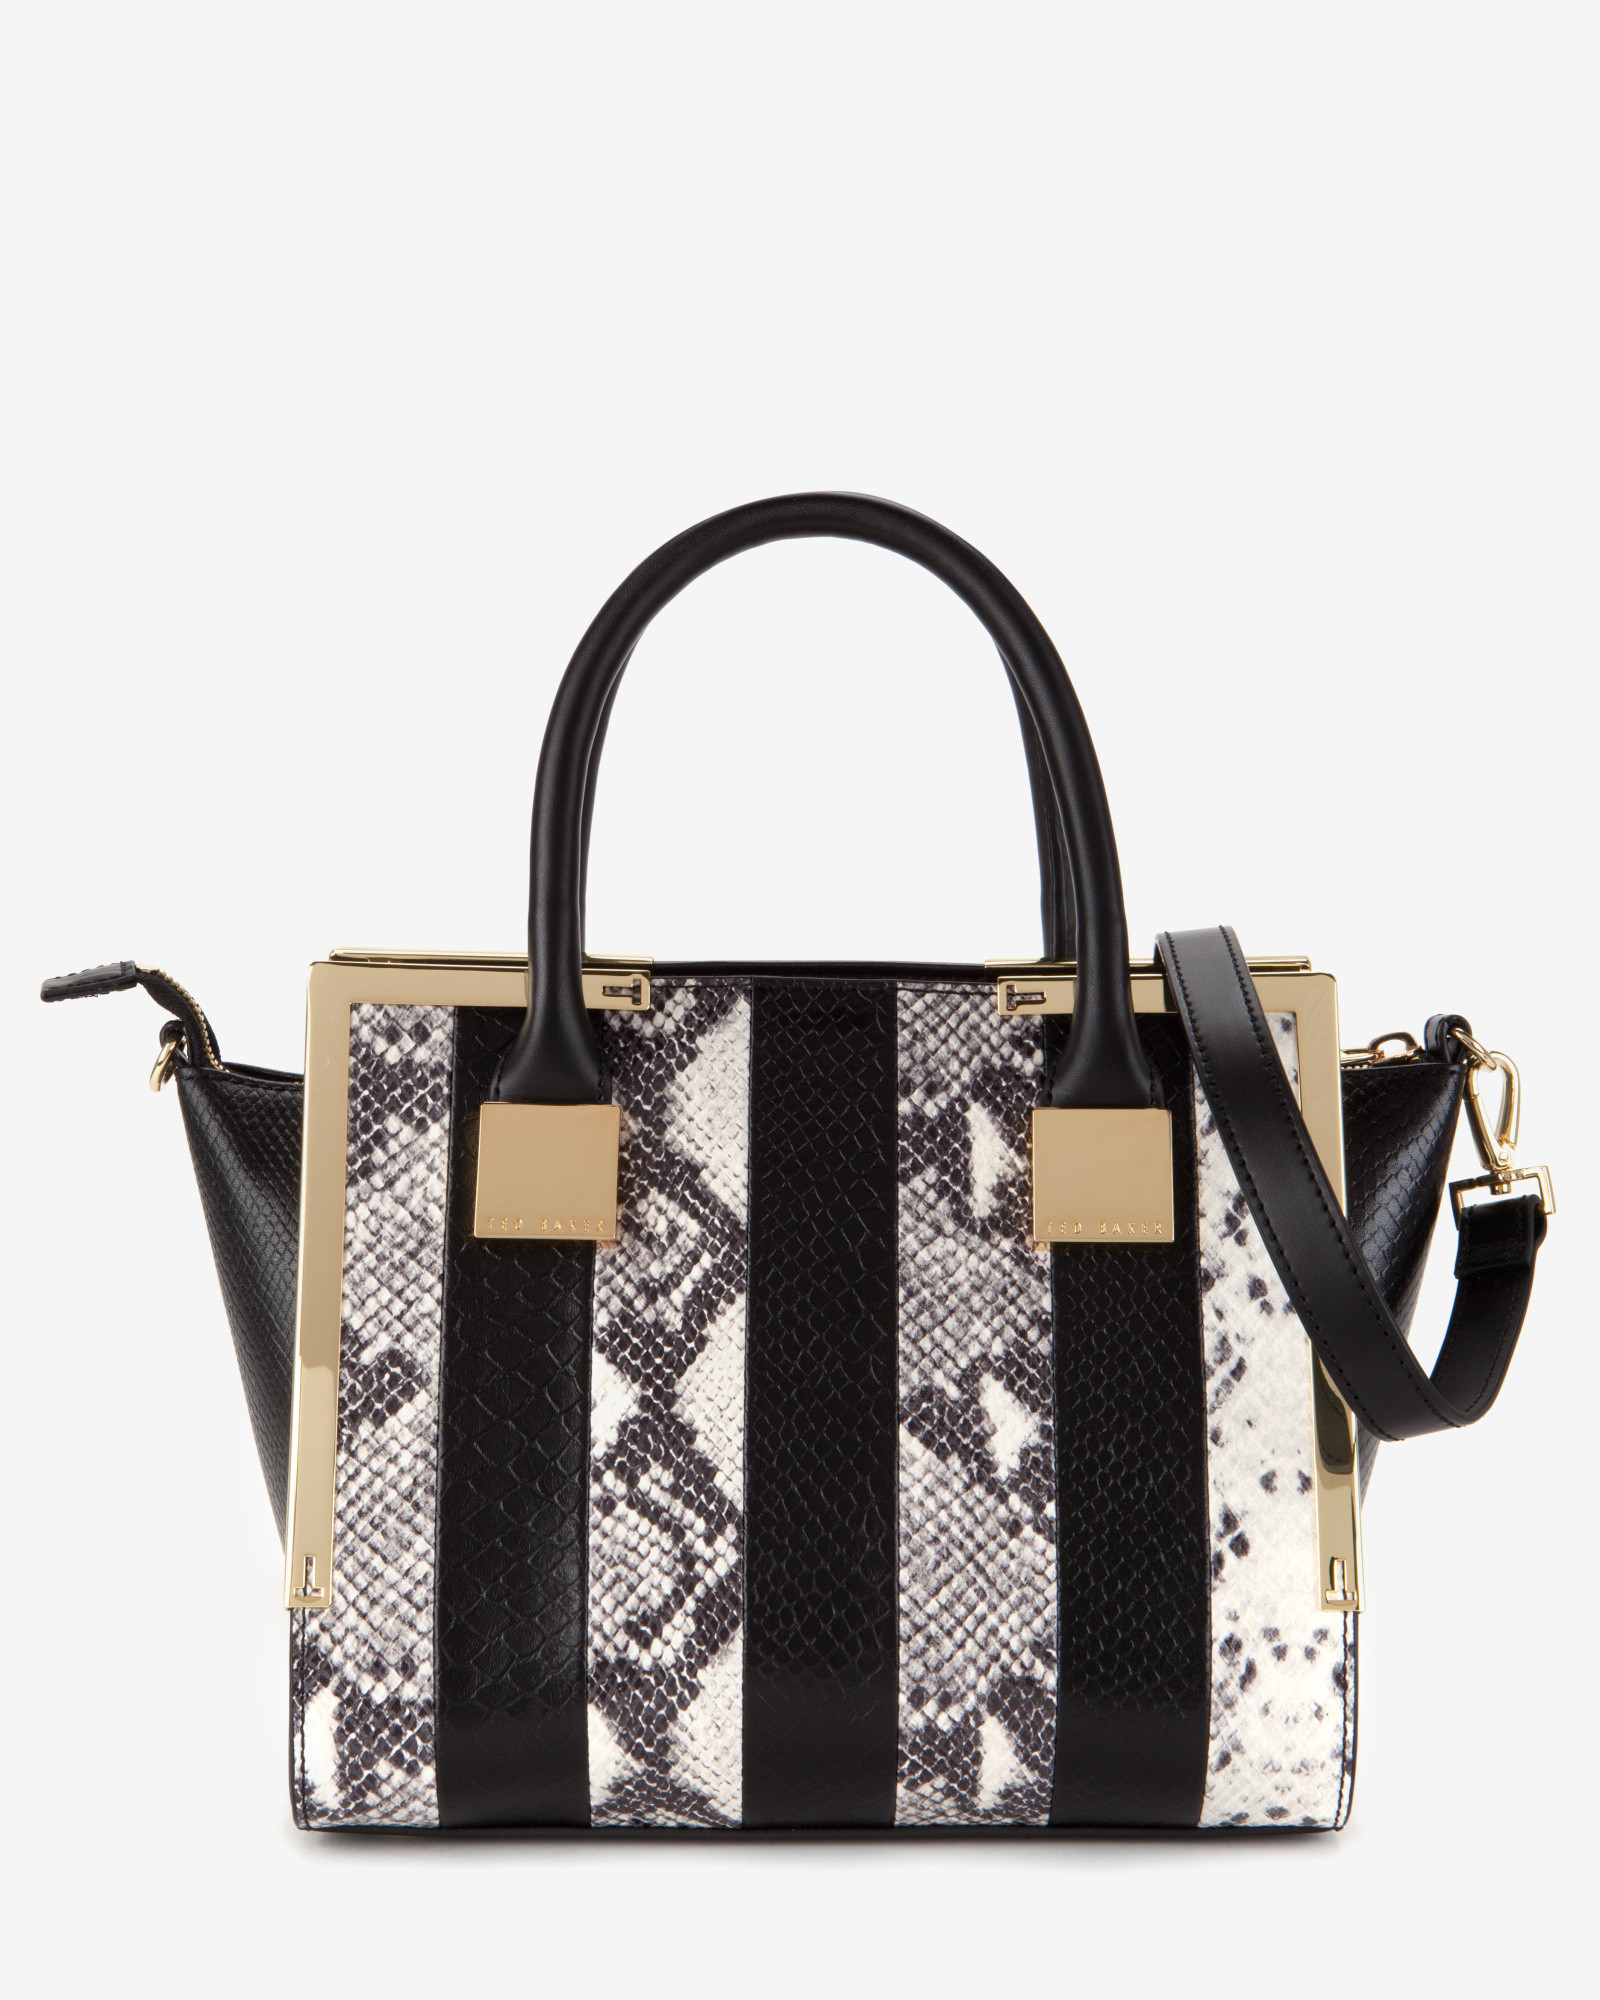 Lyst - Ted Baker Exotic Leather Mini Tote Bag in Black